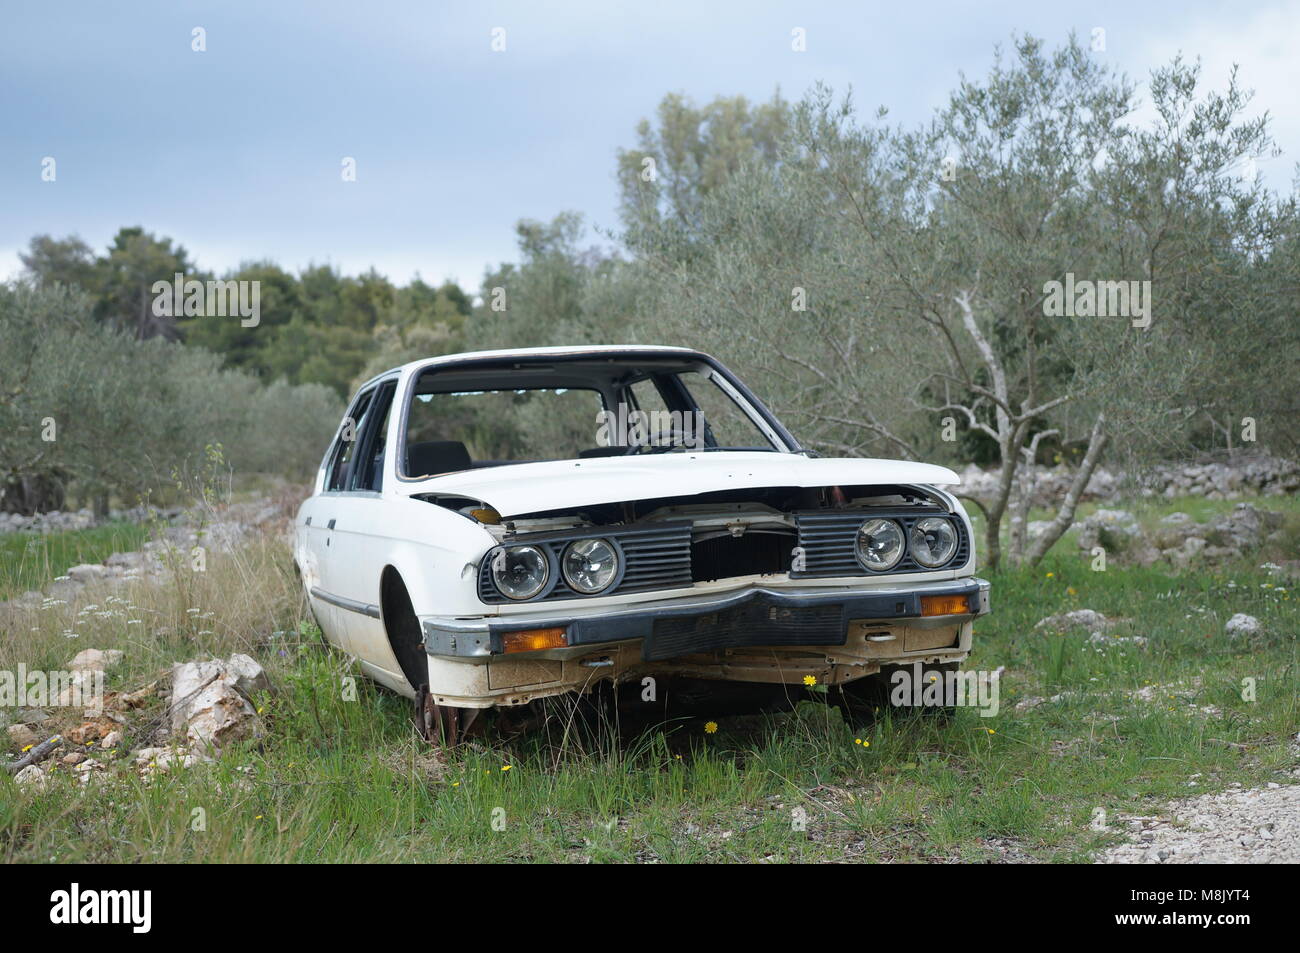 Old and abandoned car Stock Photo